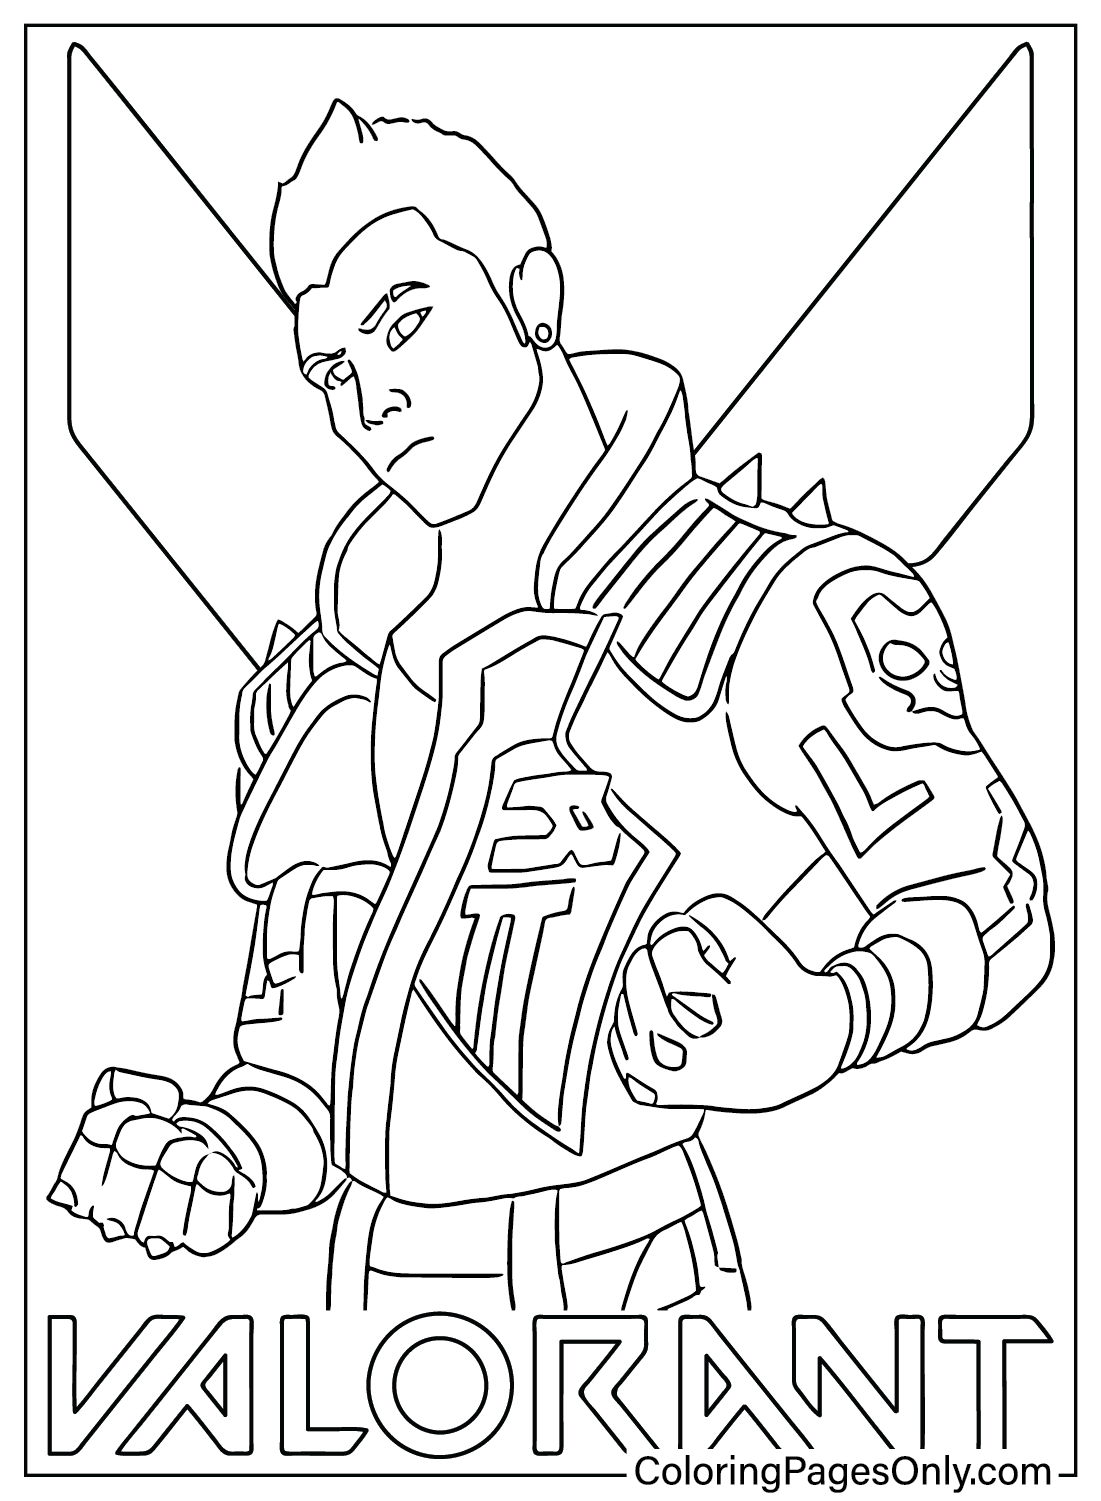 Valorant Yoru Coloring Page - Free Printable Coloring Pages